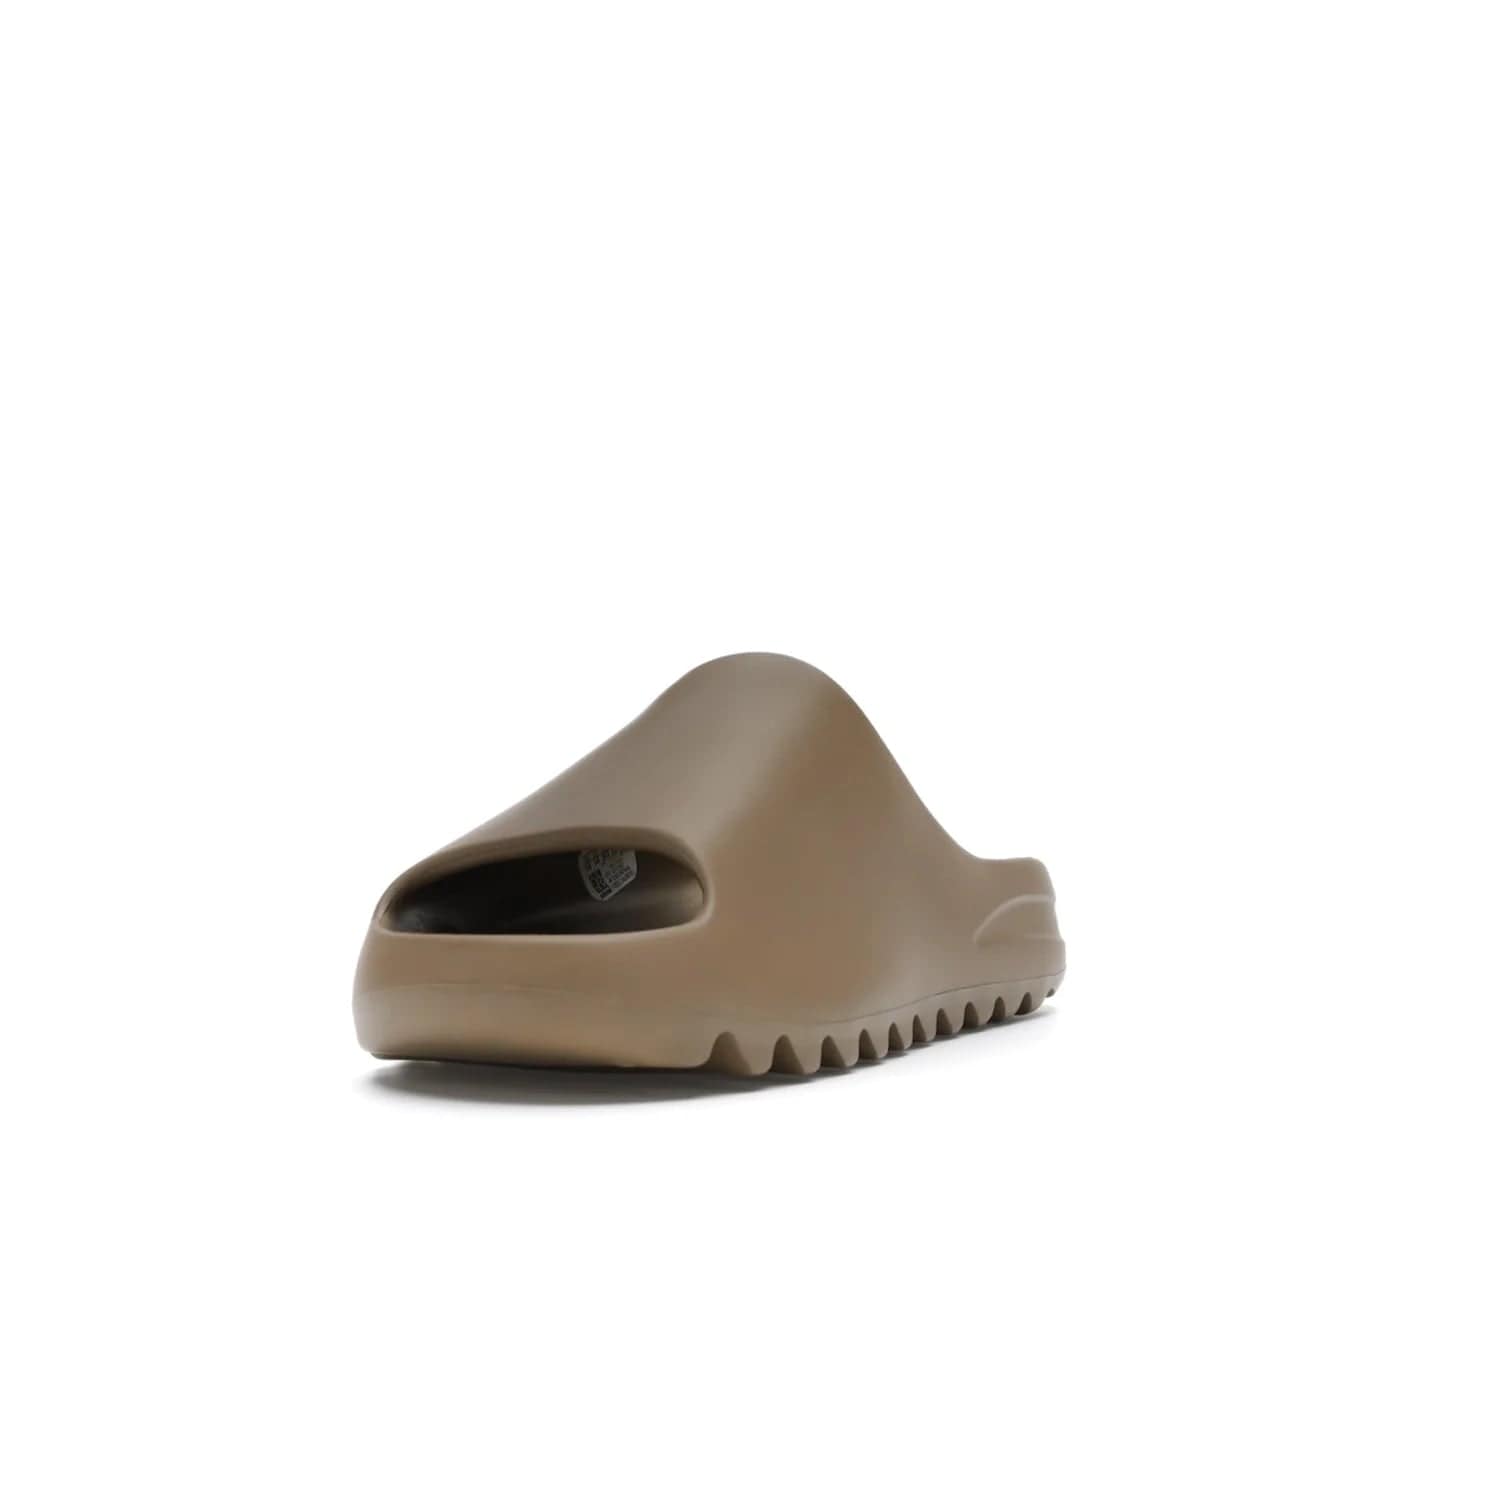 adidas Yeezy Slide Core - Image 13 - Only at www.BallersClubKickz.com - Experience lightweight comfort and cushioning with the adidas Yeezy Slide Core. Features EVA foam upper, soft footbed & grooved outsole for optimal traction & support. The Core/Core/Core colorway released April 2021.